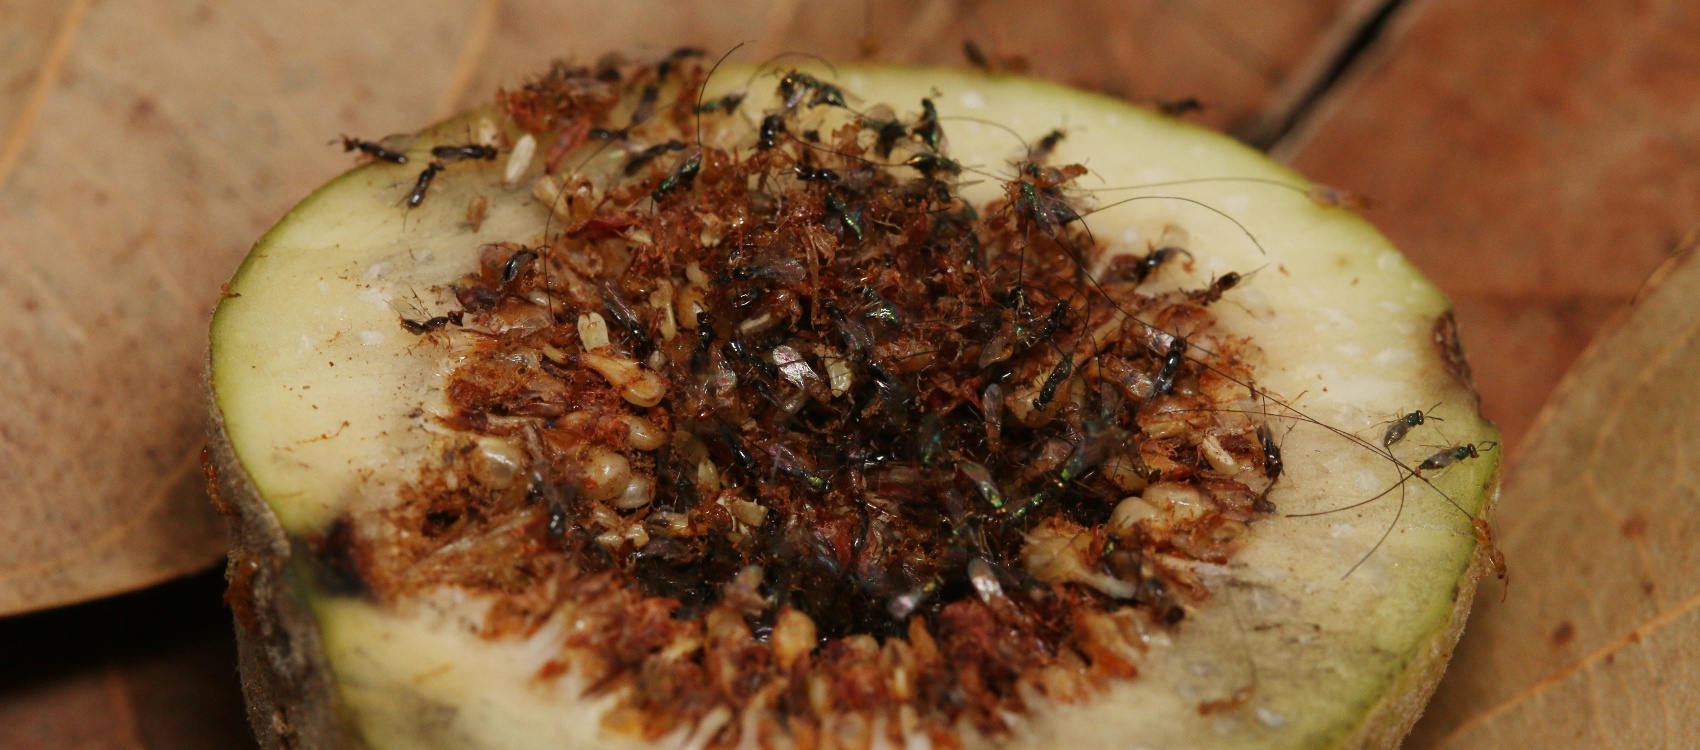 learn about Fig wasps